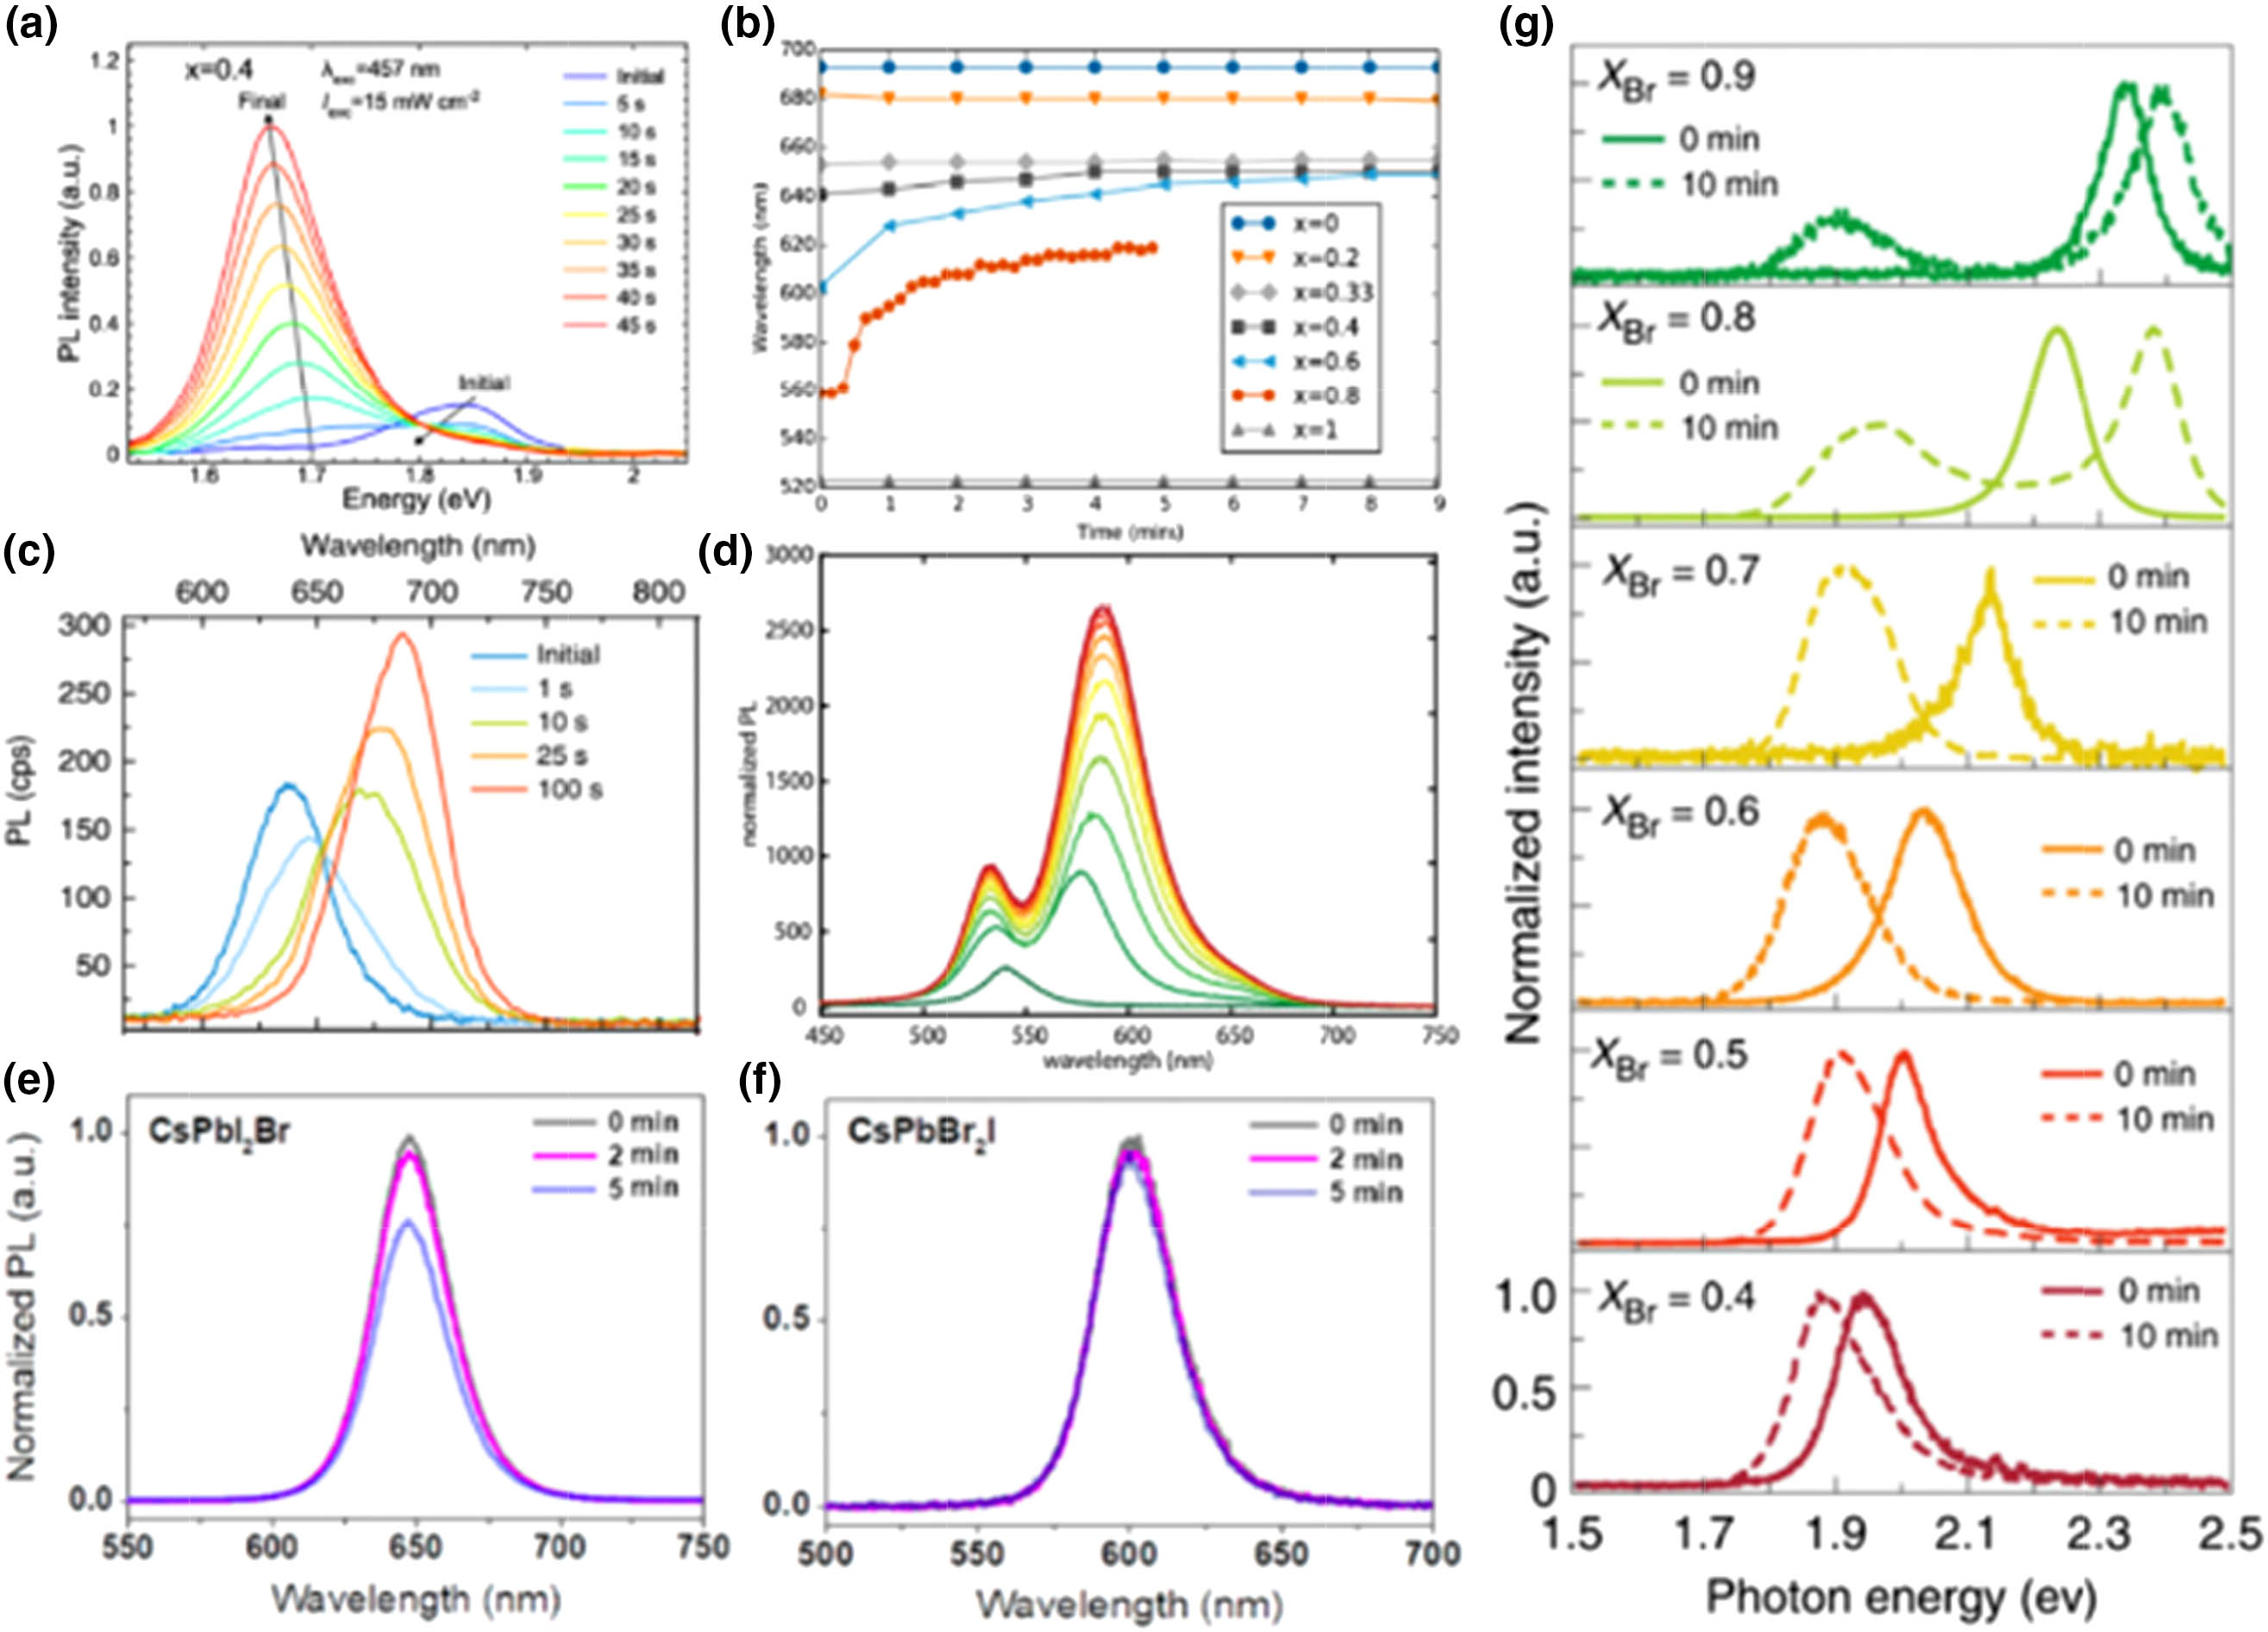 (a) PL spectra of the MAPb(Br0.4I0.6)3 thin film over 45 s in 5 s increments. Reproduced with permission [48], Copyright 2015, RSC Publishing. (b) Time-dependent PL peak position in CsPb(BrxI1−x)3 of different halide compositions. Reproduced with permission [100], Copyright 2016, American Chemical Society. (c) PL spectra of CsPb(Br0.5I0.5)3 film with the illumination duration of 100 s. Reproduced with permission [52], Copyright 2017, Nature Publishing Group. (d) PL spectra of CsPb(Br0.1I0.9)3 with the illumination duration of 10 min. Reproduced with permission [50], Copyright 2017, American Chemical Society. PL spectra with the illumination of 5 min of the (e) CsPbI2Br and (f) CsPbBr2I films. Reproduced with permission [65], Copyright 2017, American Chemical Society. (g) PL spectra of the CsPb(BrxI1−x)3 with x ranging from 0.4 to 0.9. The solid lines were the spectra taken from freshly made samples, and the dashed lines were measured after 10 min illumination. Reproduced with permission [61], Copyright 2019, Nature Publishing Group.